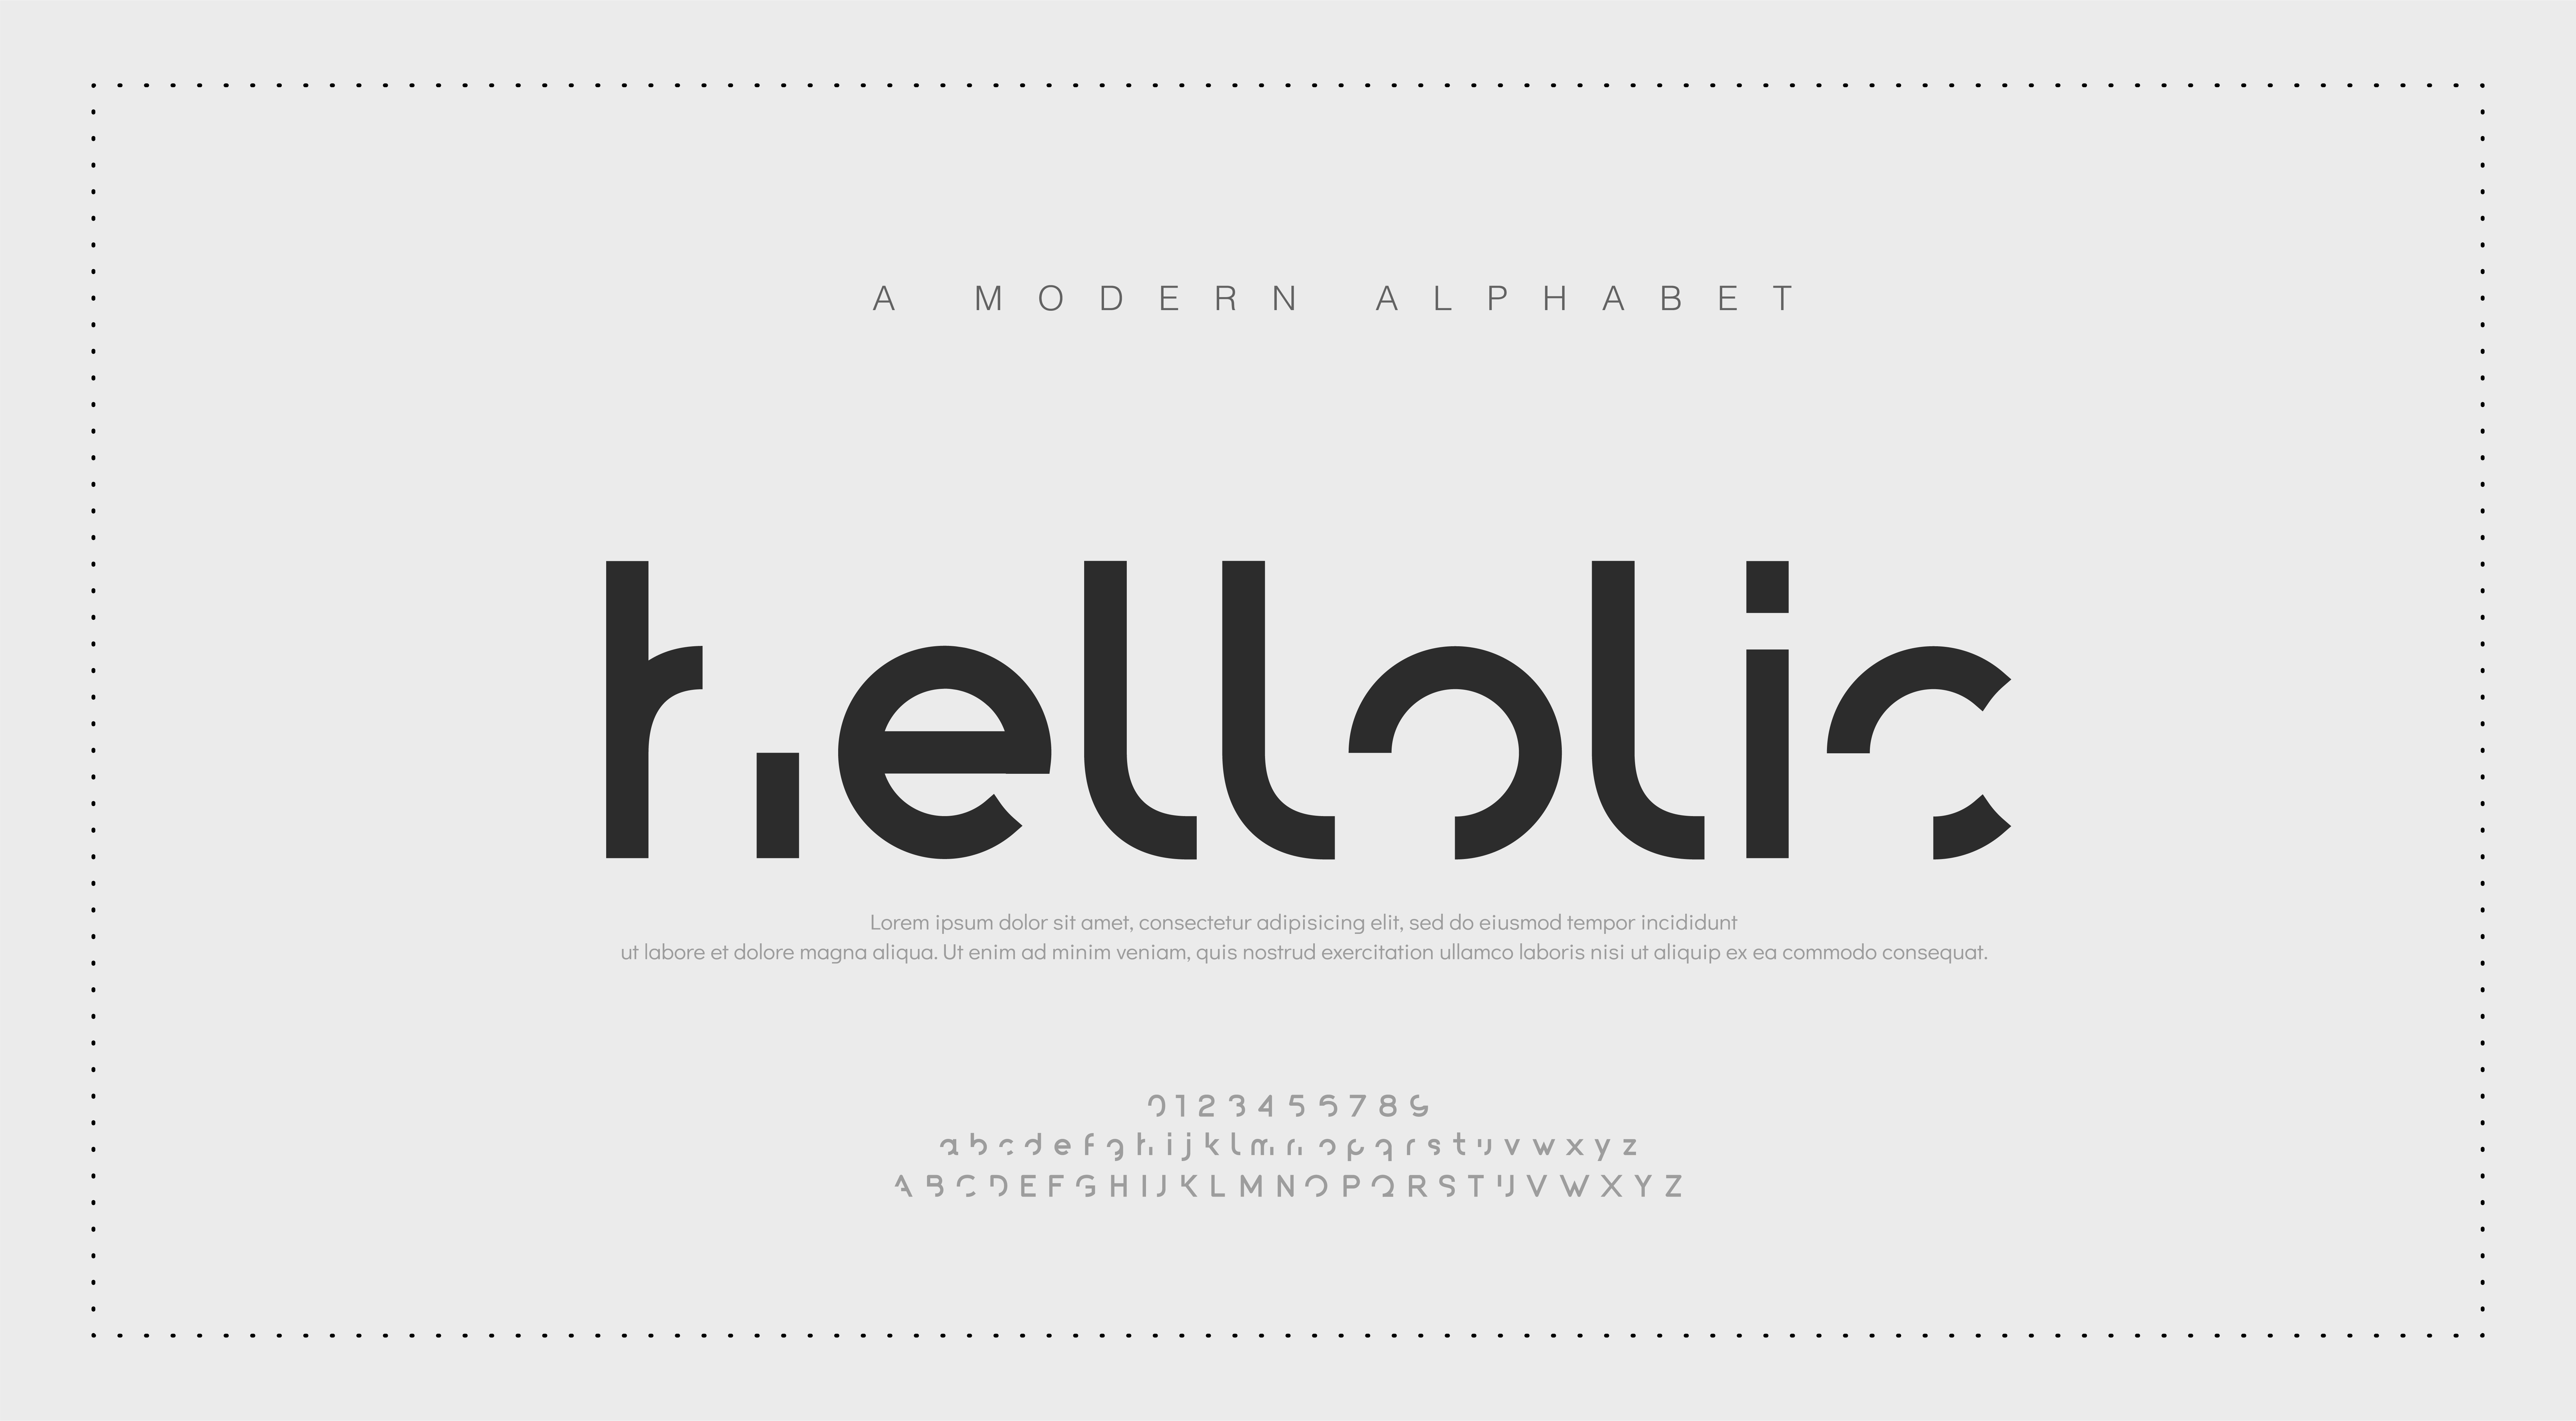 Abstract modern urban alphabet fonts. Typography sport, simple ...